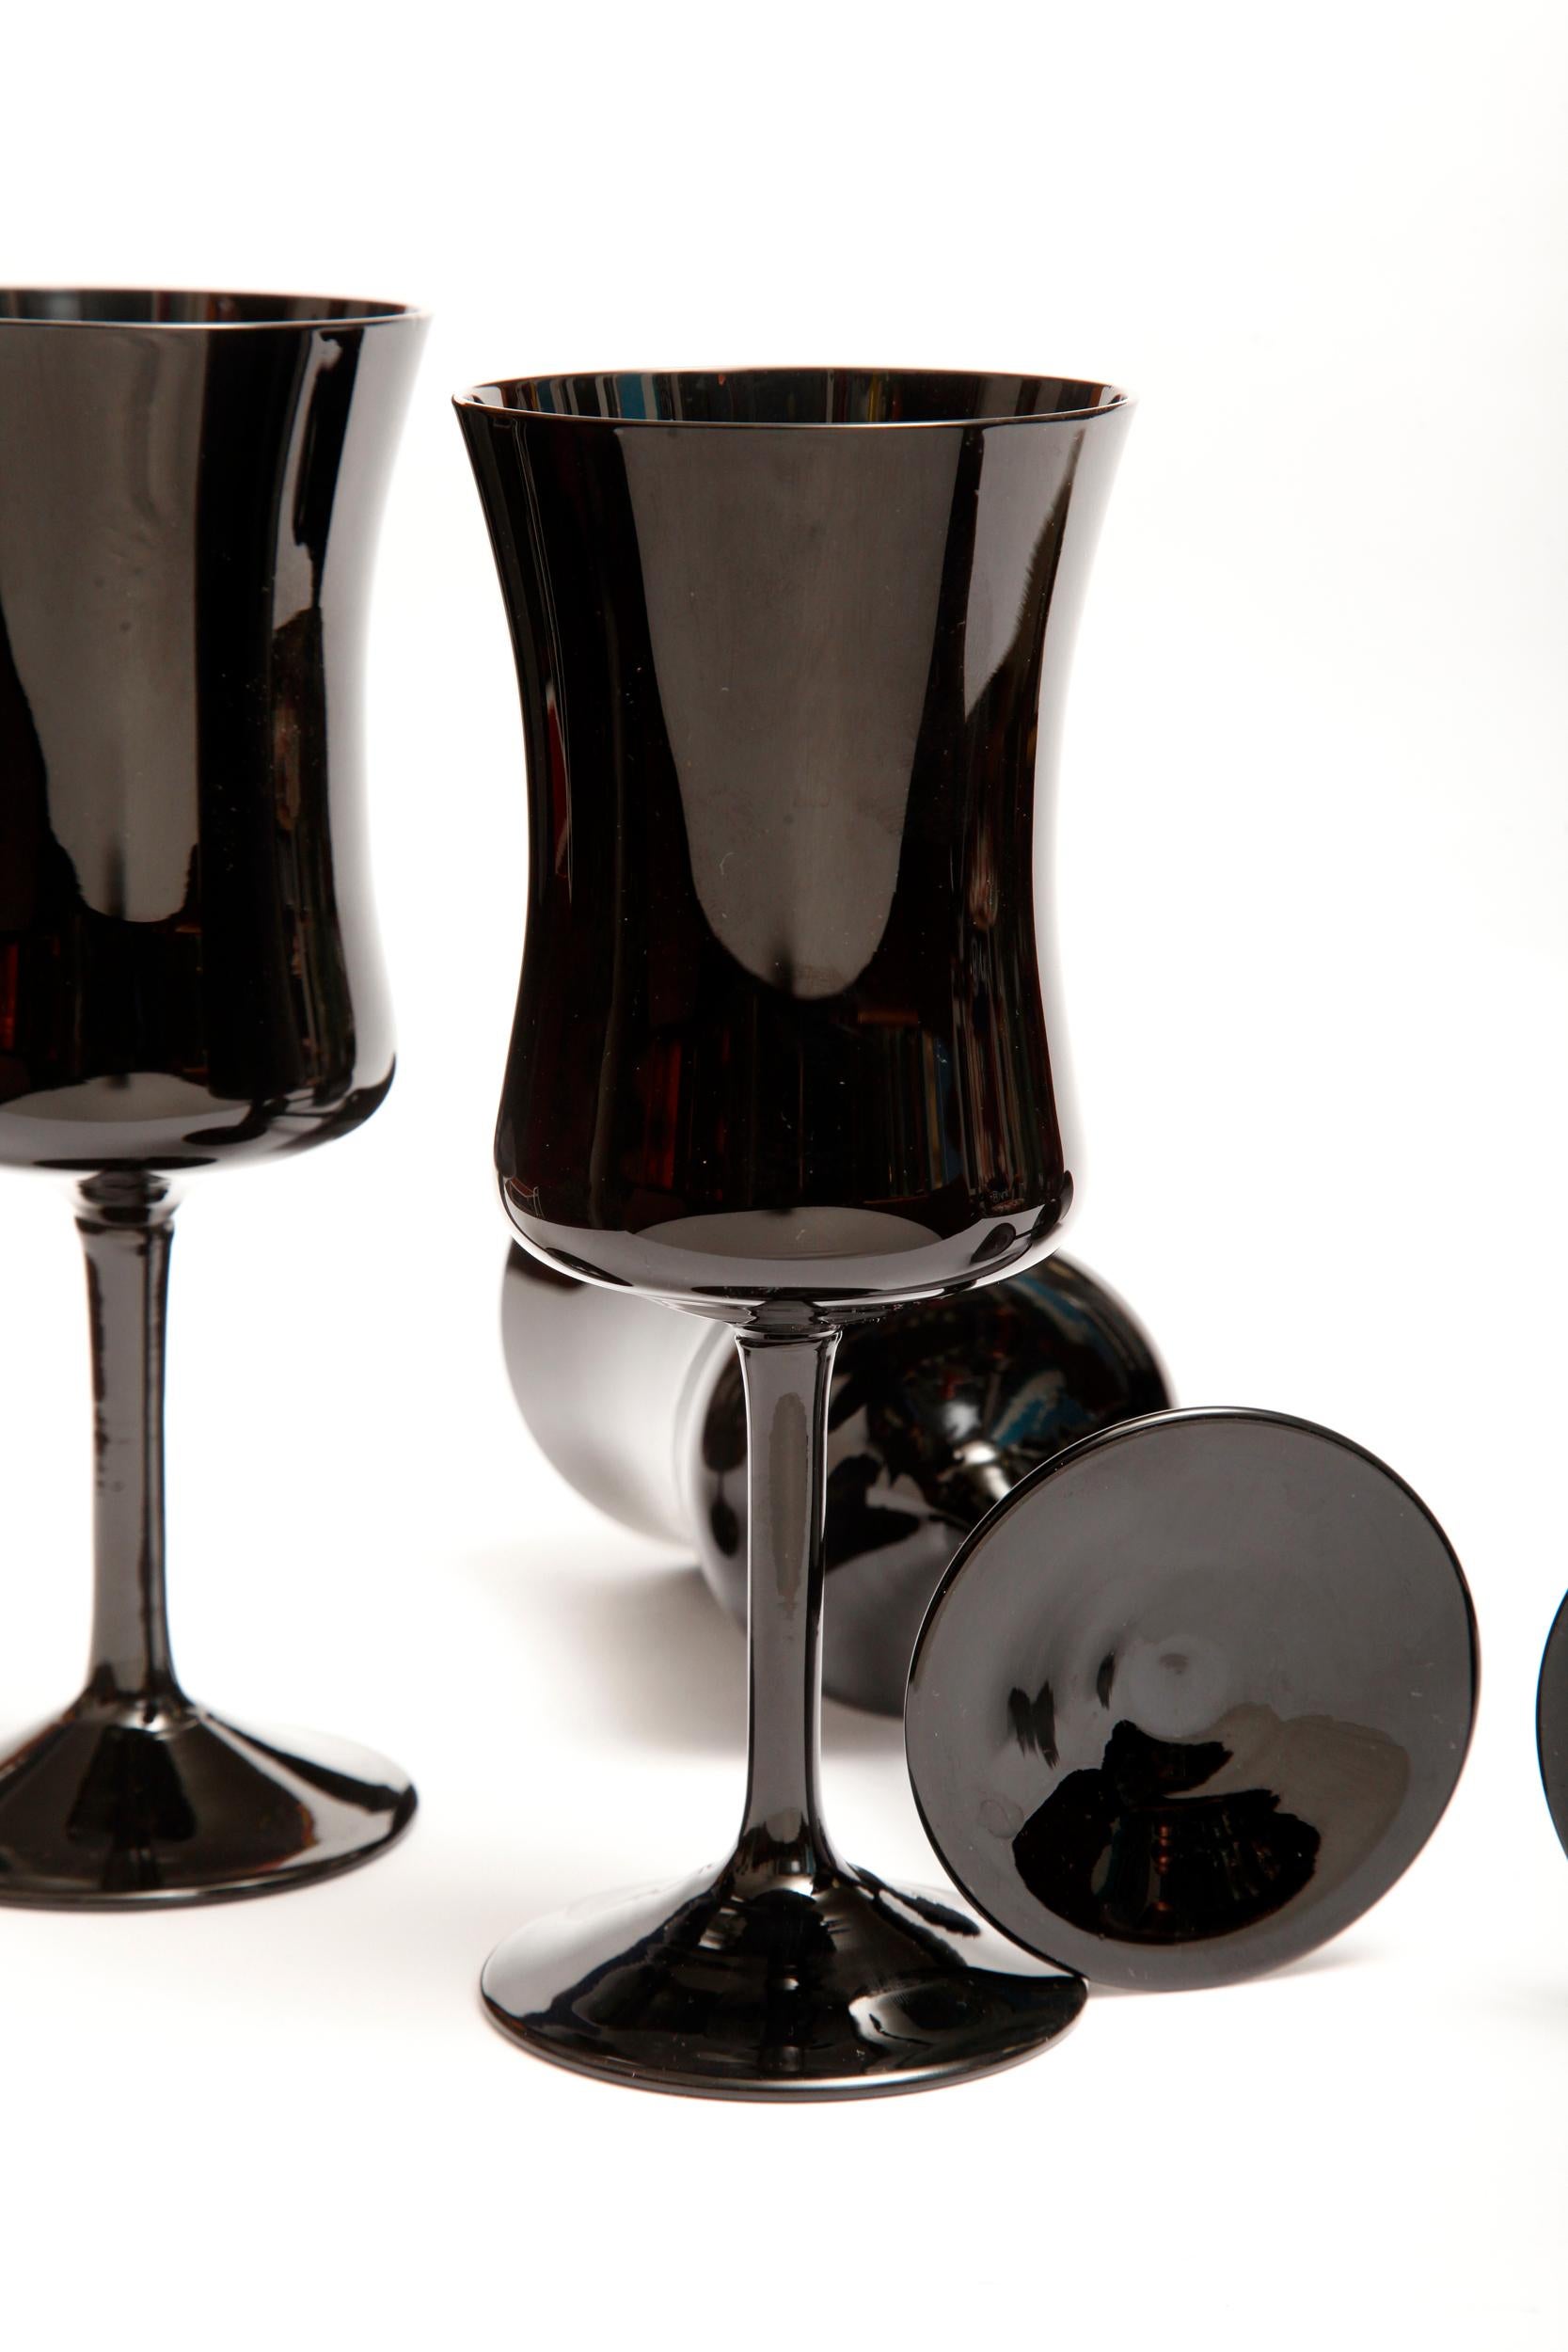 Four Black Elegant Glasses by Zbigniew Horbowy, Poland, 1970s For Sale 1